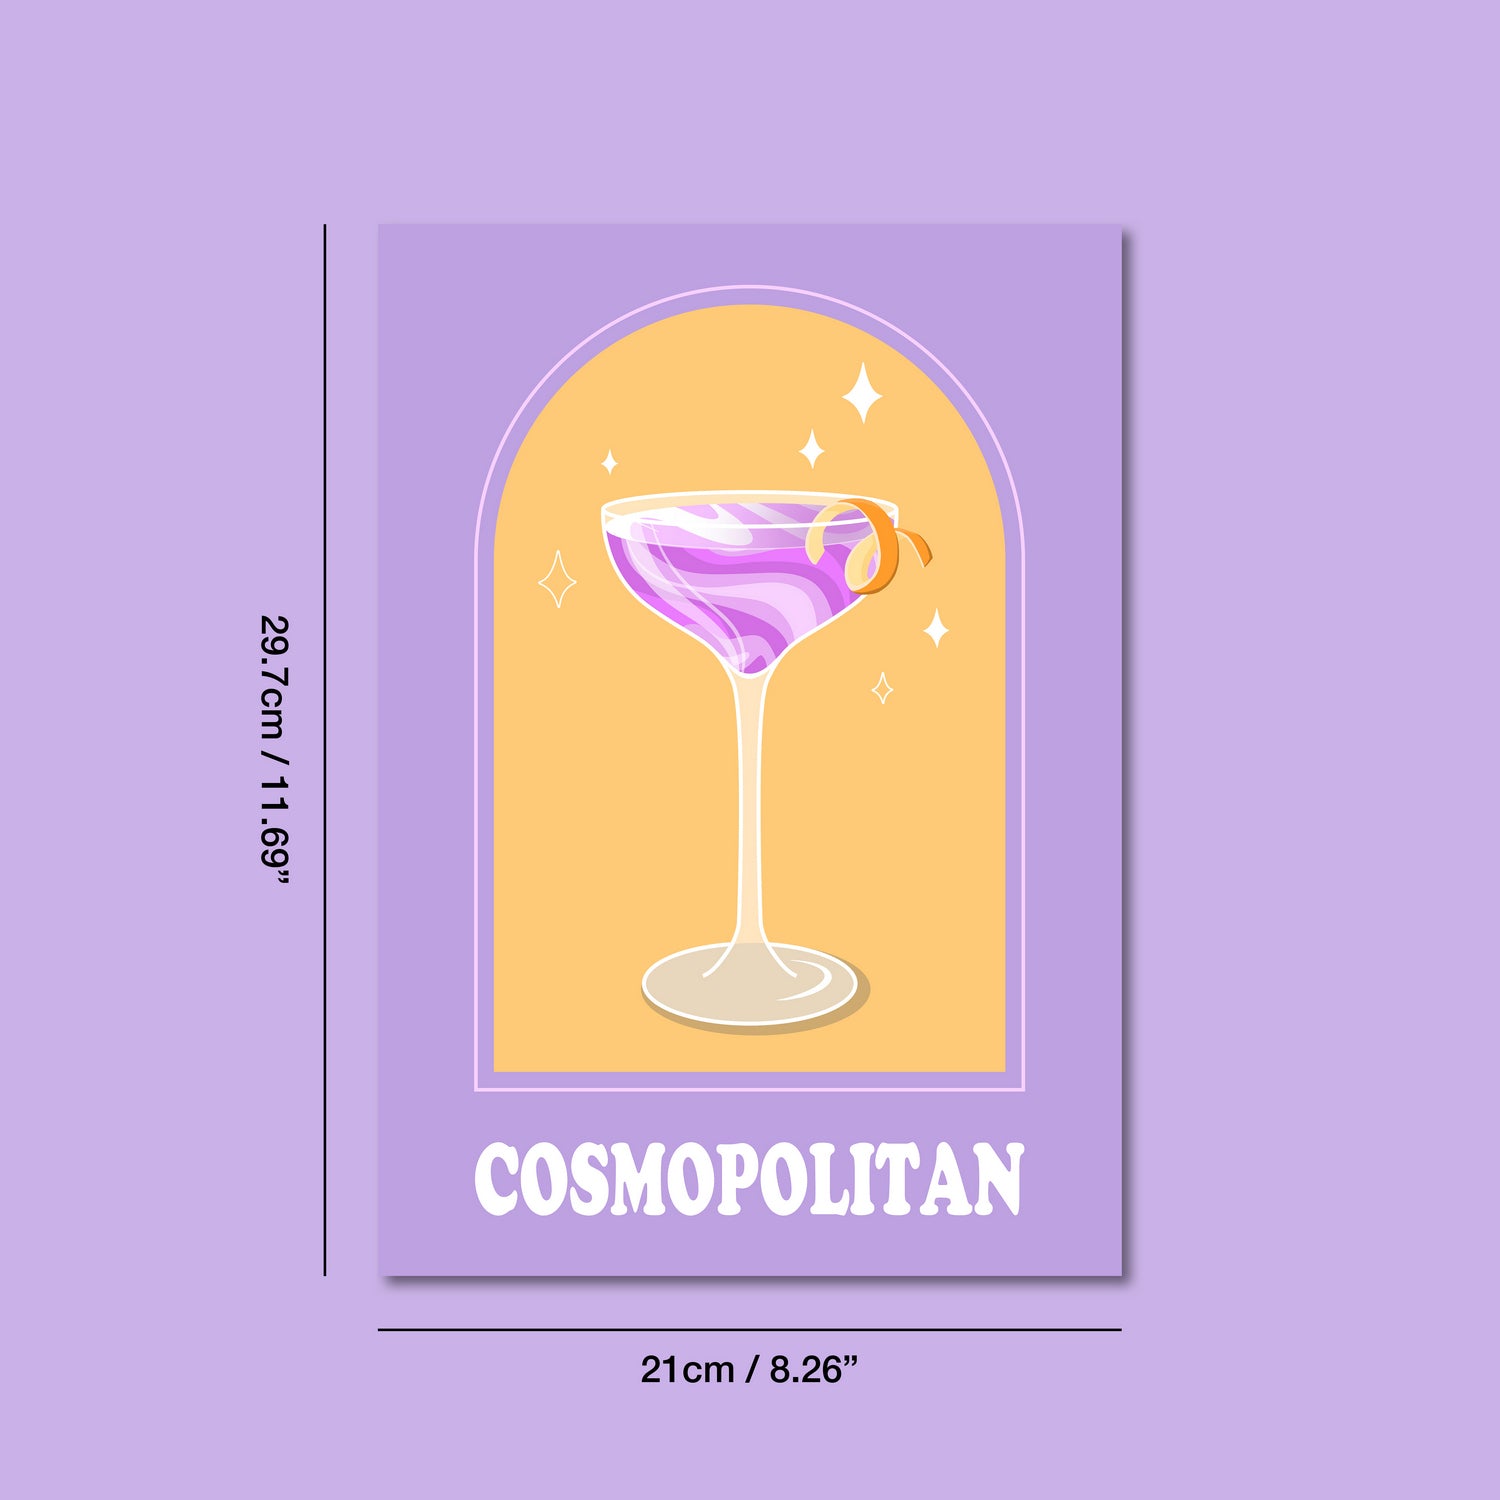 Cosmopolitan Art Print by Cocktail Critters